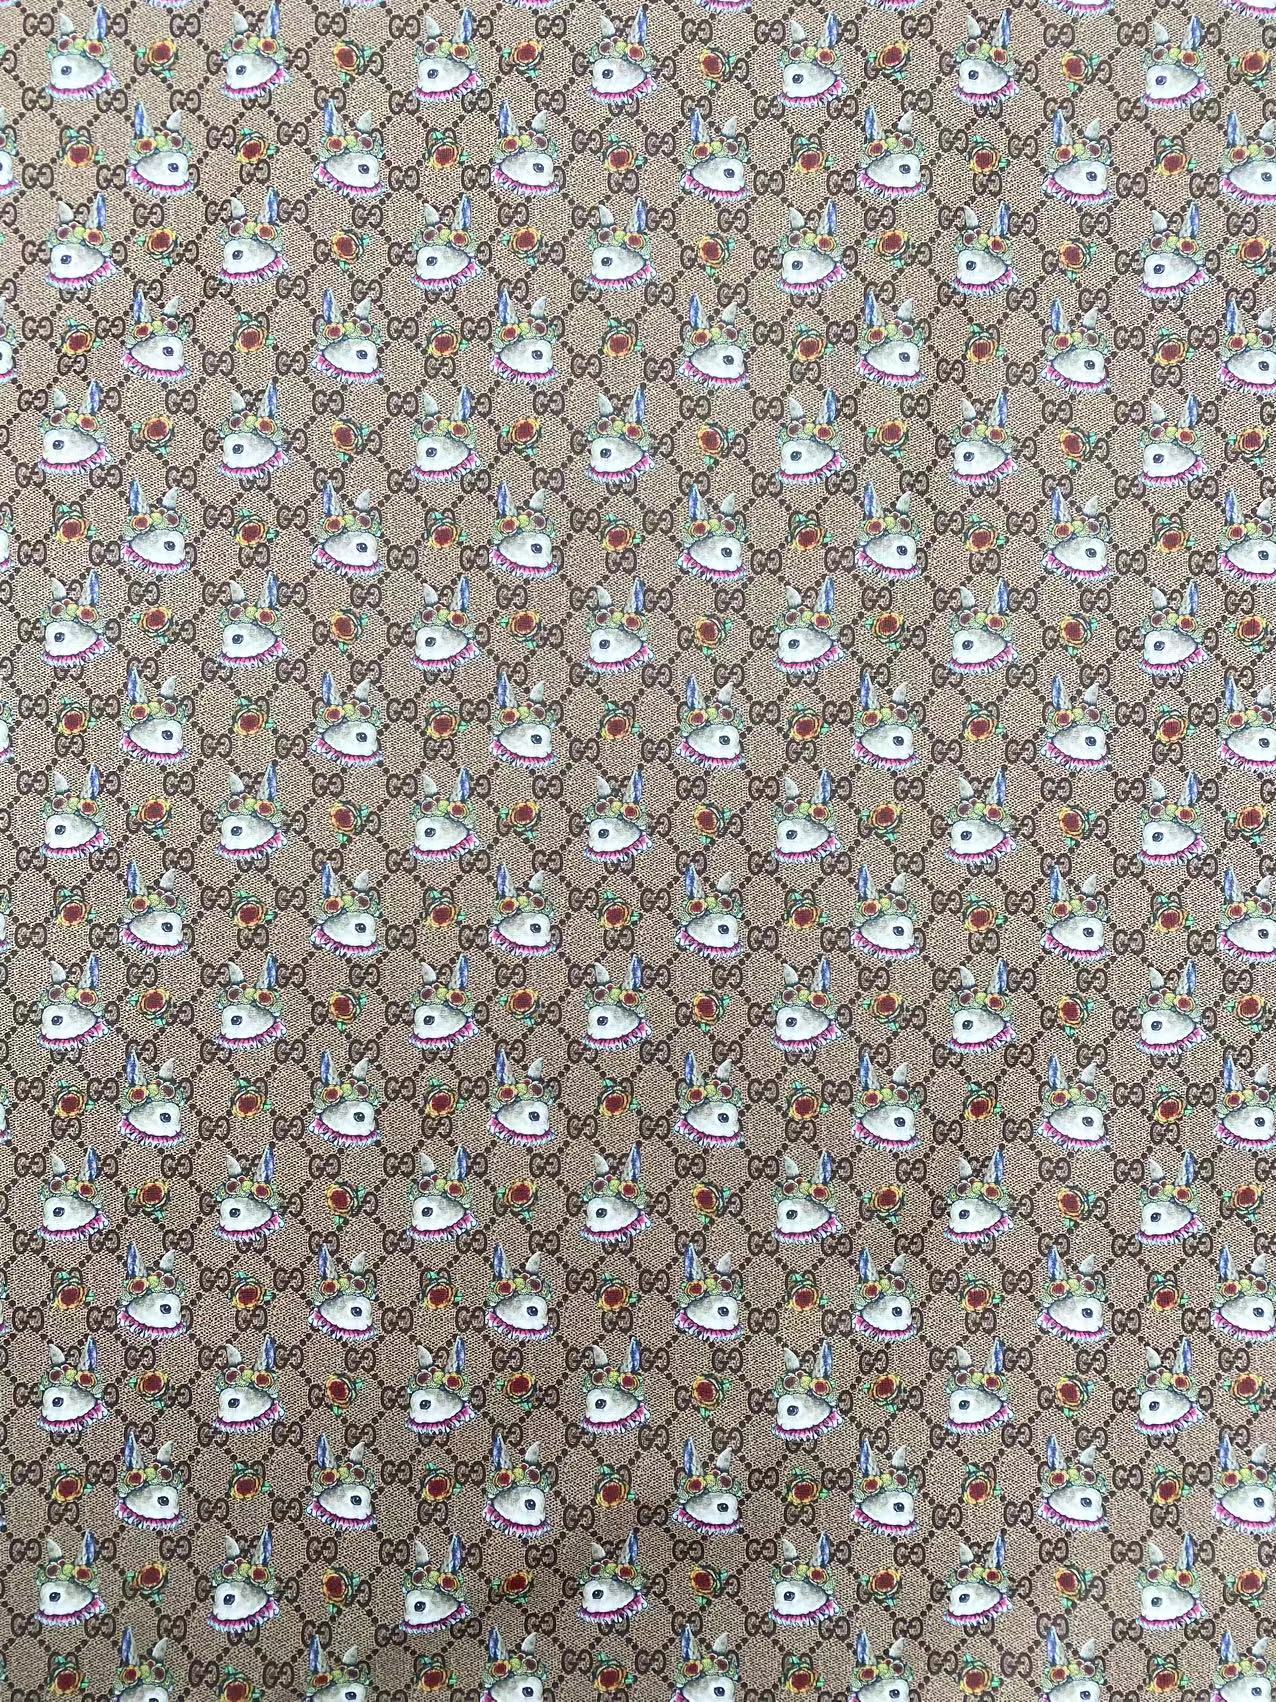 Gucci Easter Bunny Design Leather Fabric Vinyl for DIY Crafting Sewing Custom